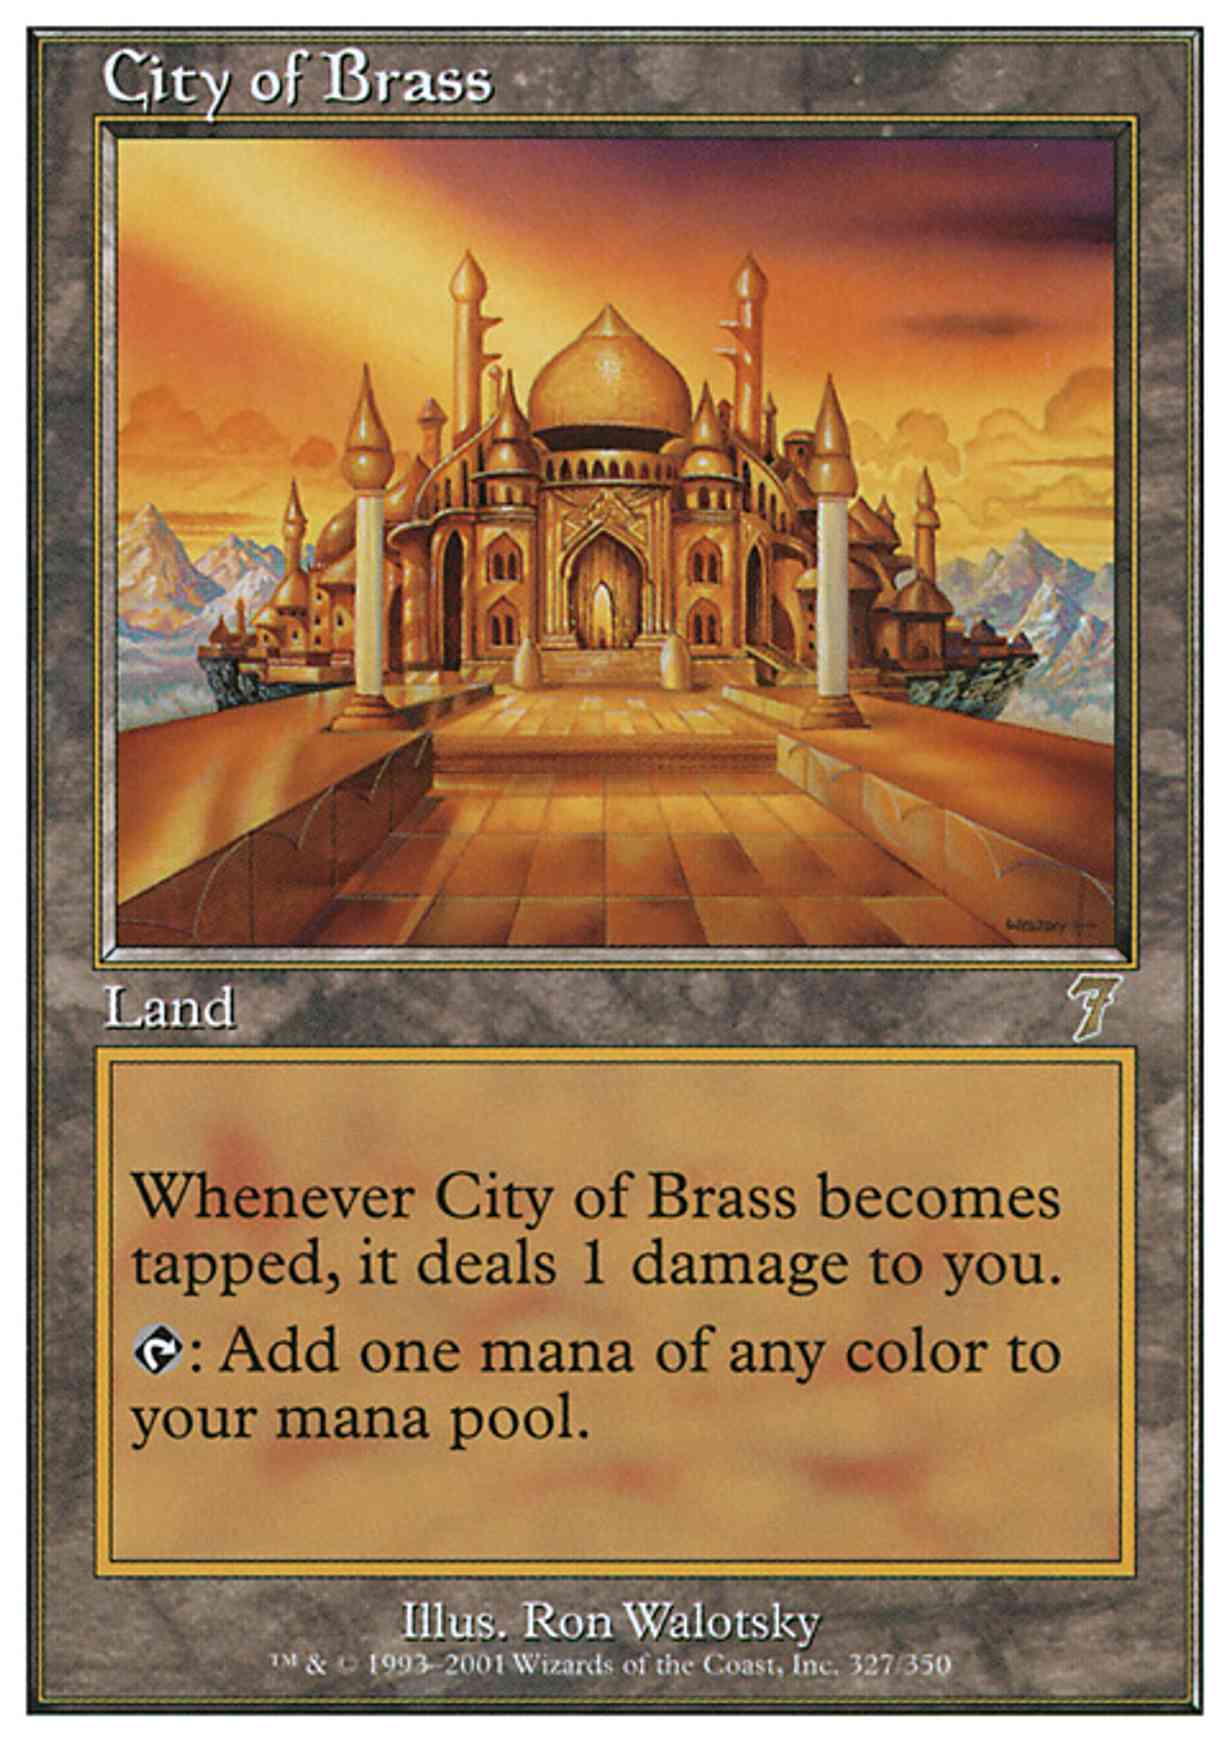 City of Brass magic card front